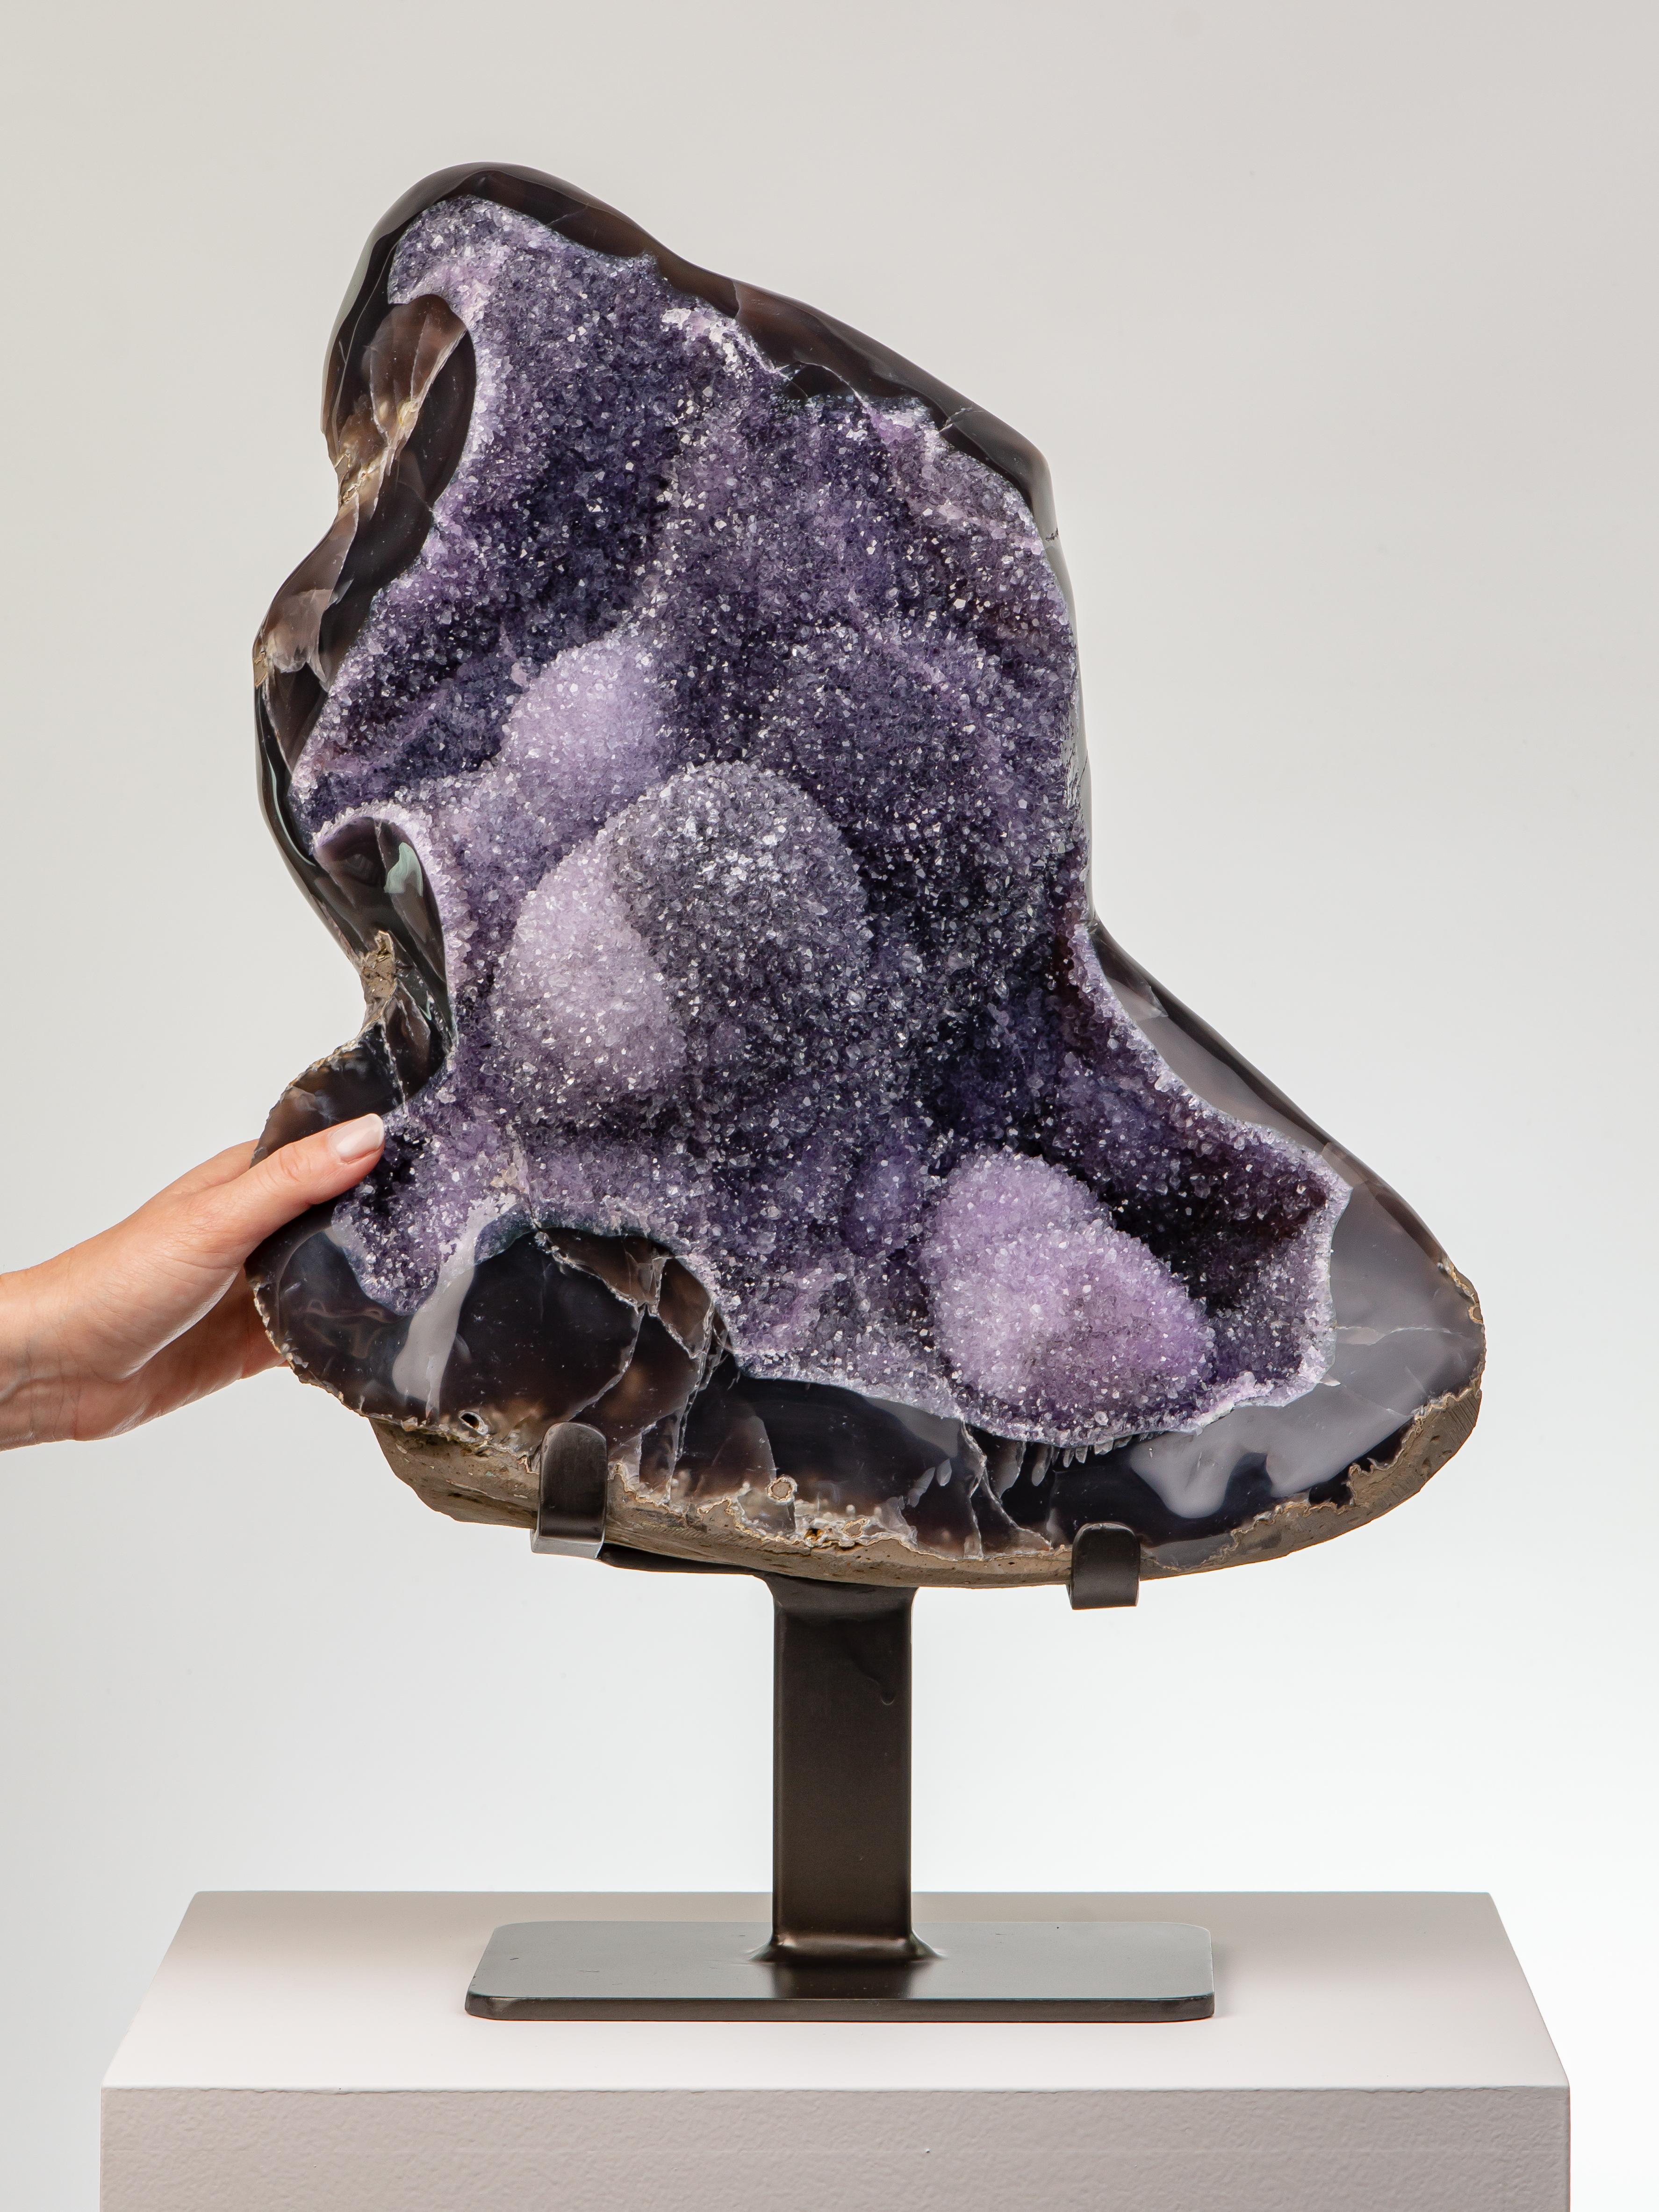 A dynamic formation with a thick blue-brown agatised border. The crystal
lined interior equally dynamic with shocks of electric amethyst contrasting
with darker colours on a bed of large stalactites.

This piece was legally and ethically sourced